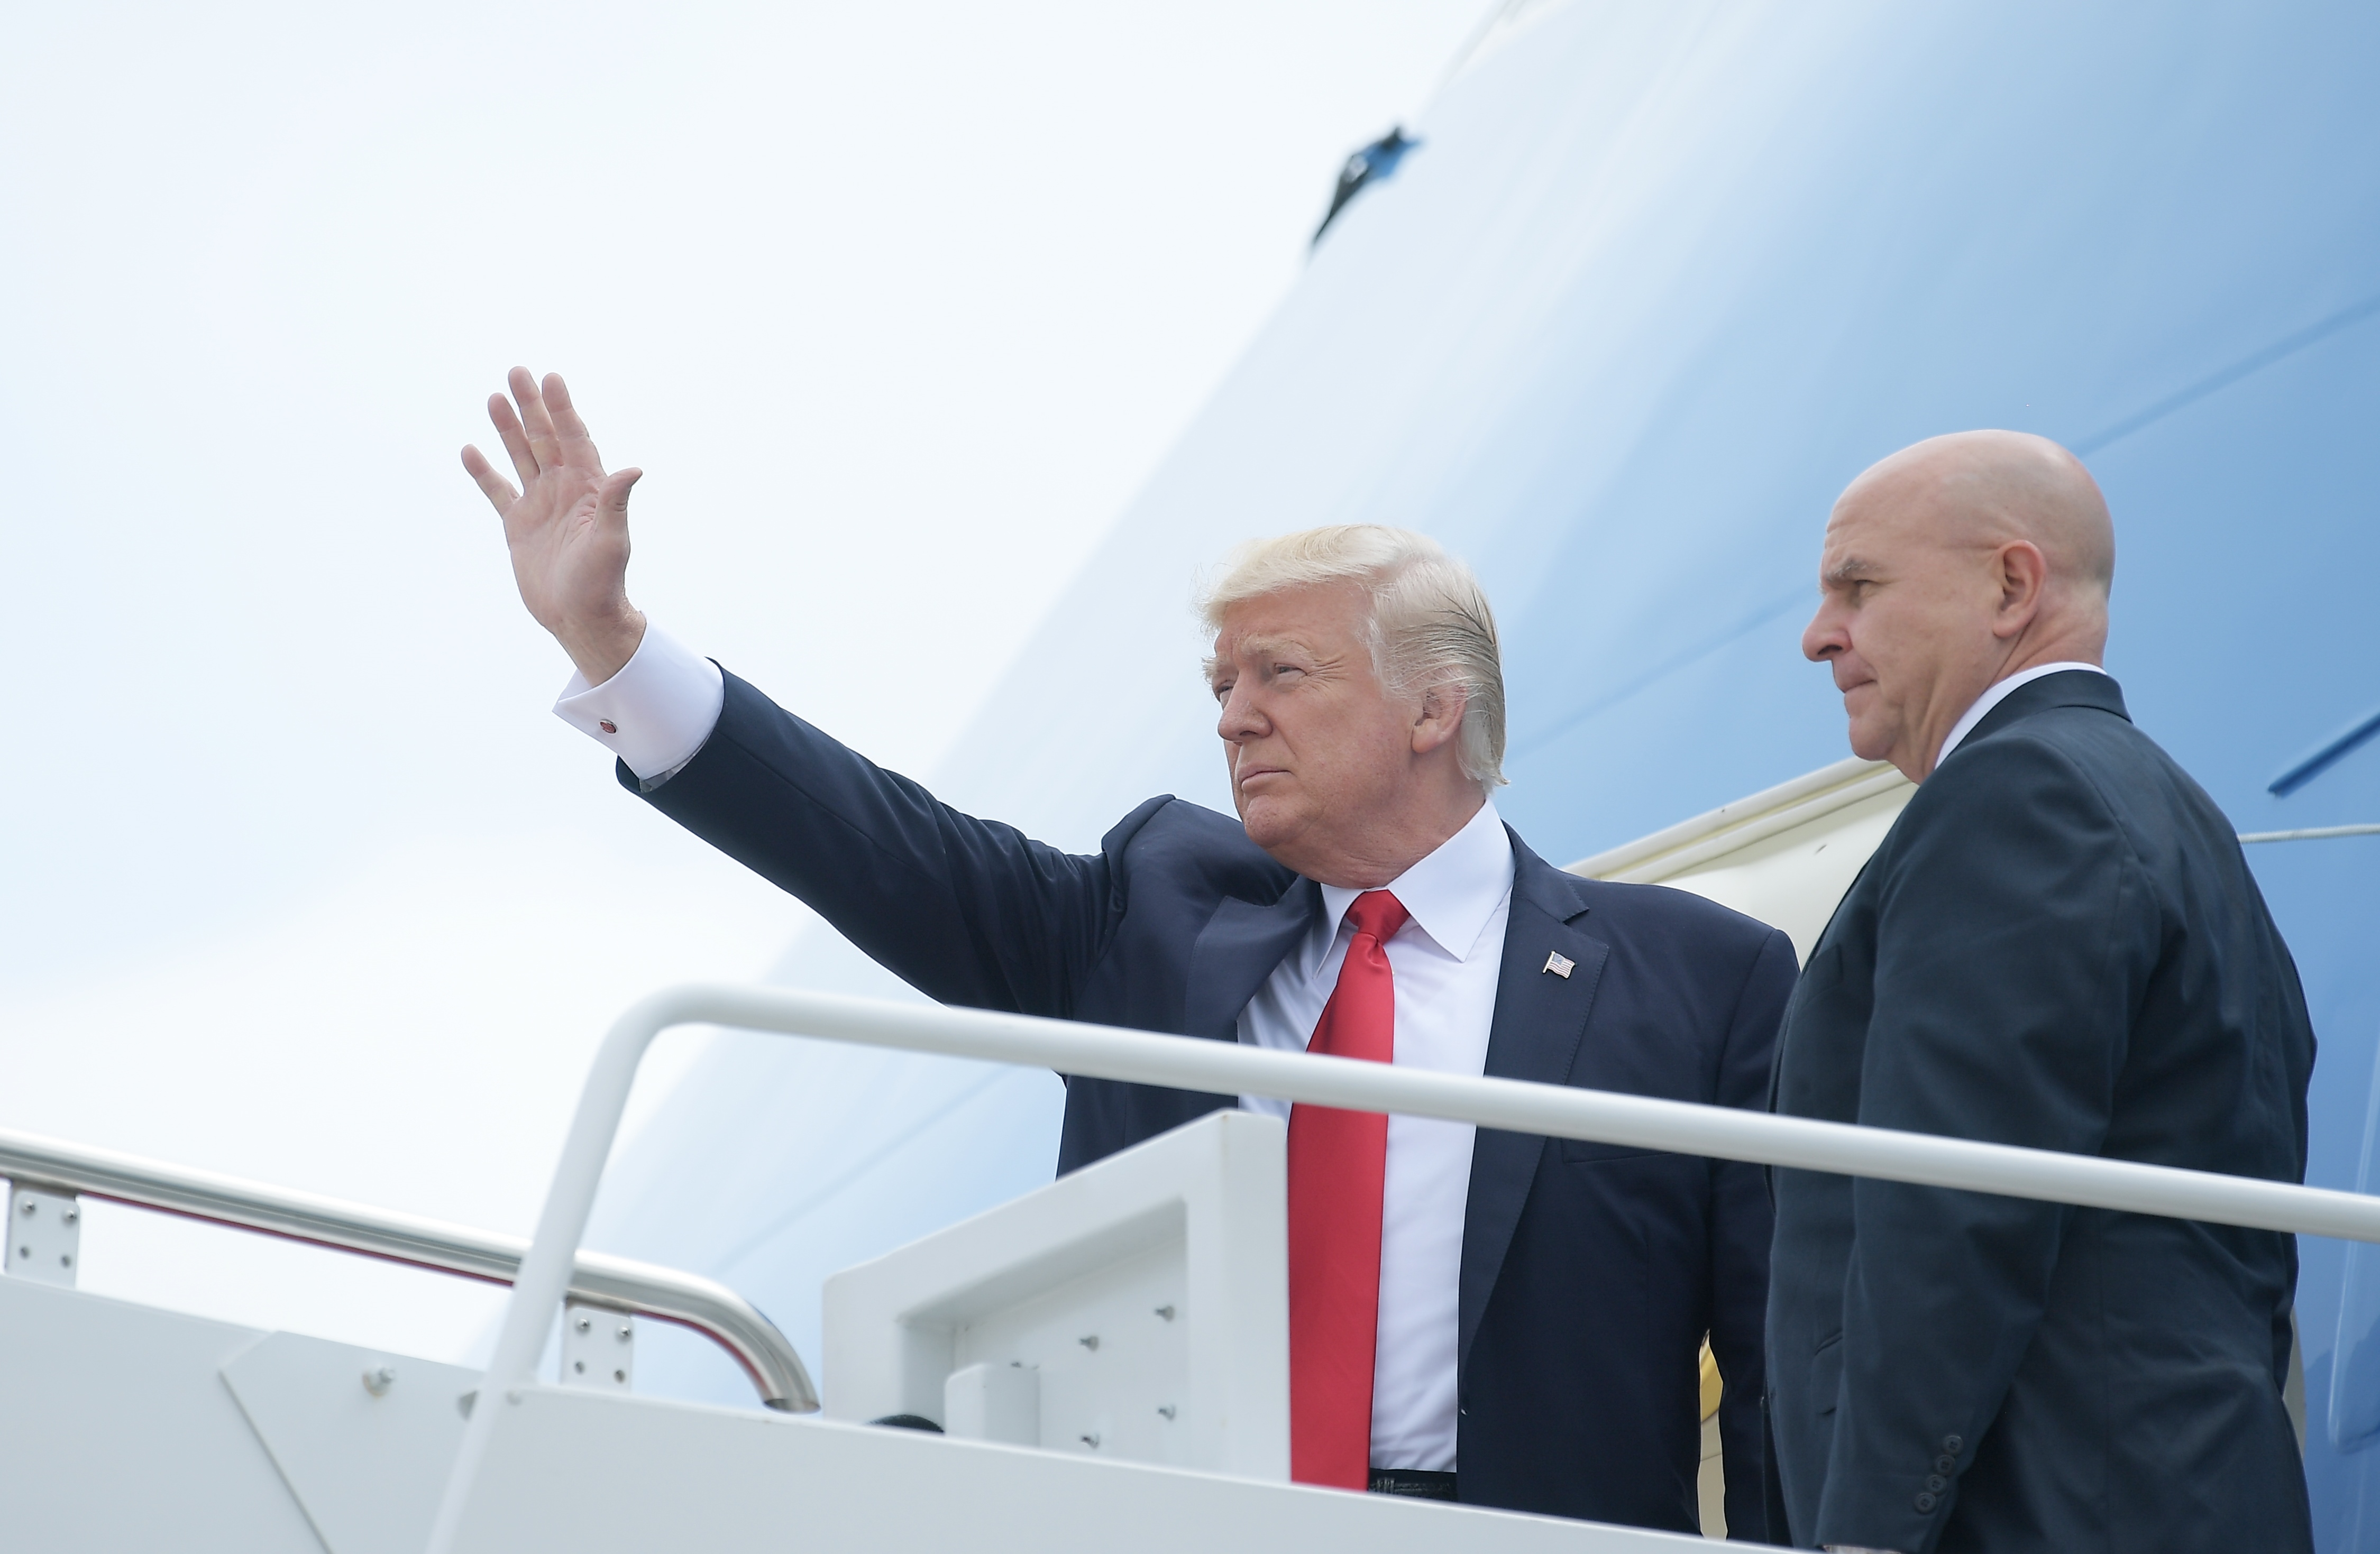 US President Donald Trump and National Security Advisor H. R. McMaster board Air Force One before departing from Andrews Air Force Base for Miami, Florida on June 16, 2017. (Photograph by Mandel Ngan—Getty/AFP)